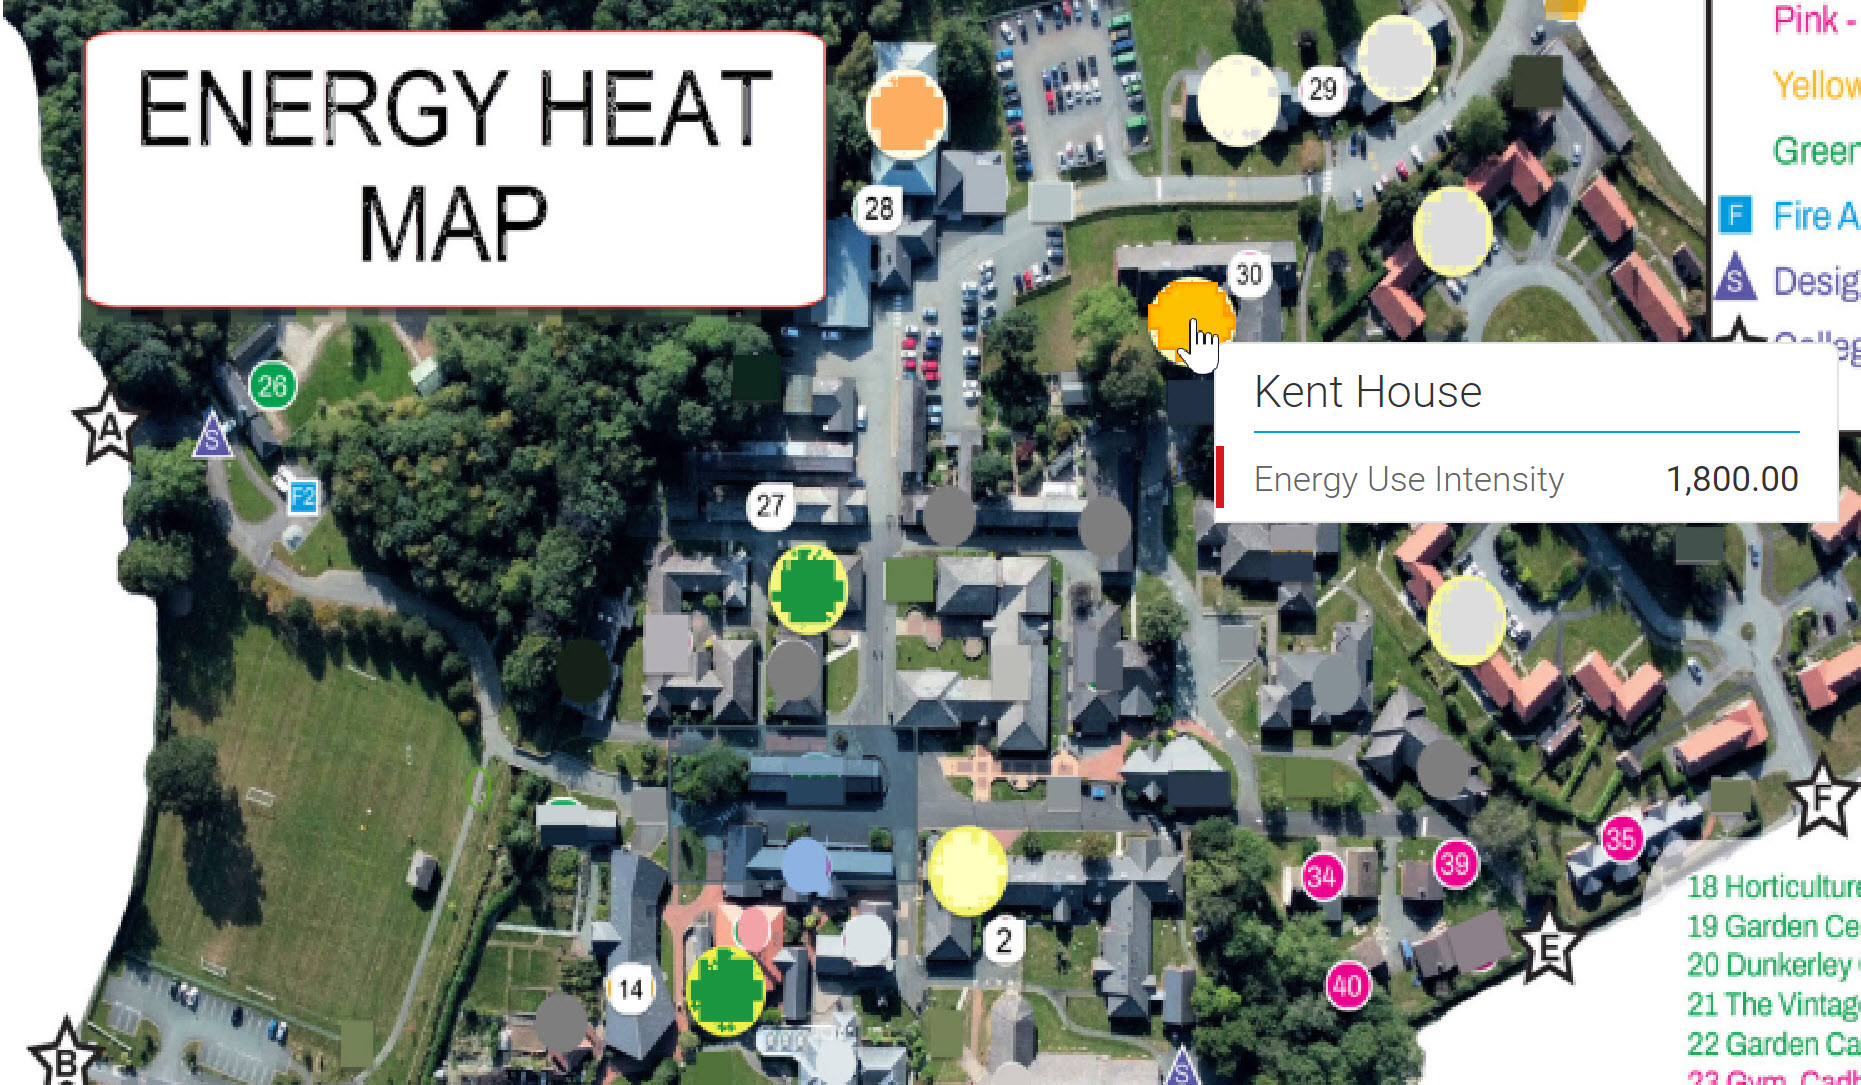 aerial heatmap of an estate showing energy usage in buildings.